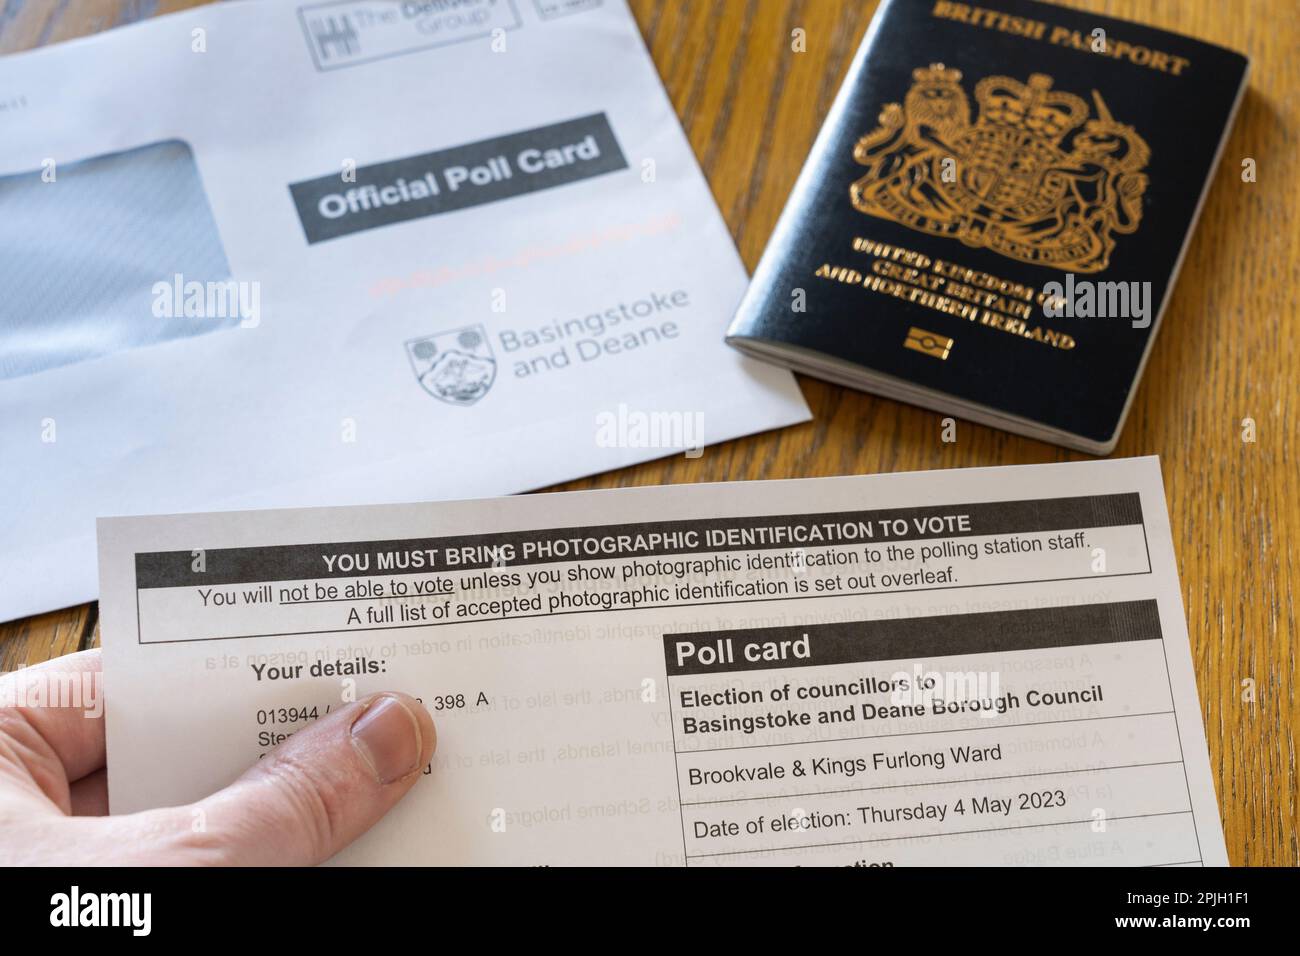 New voter ID laws require photographic identification for the first time in the May 2023 local elections. Man holding an official poll card. UK Stock Photo